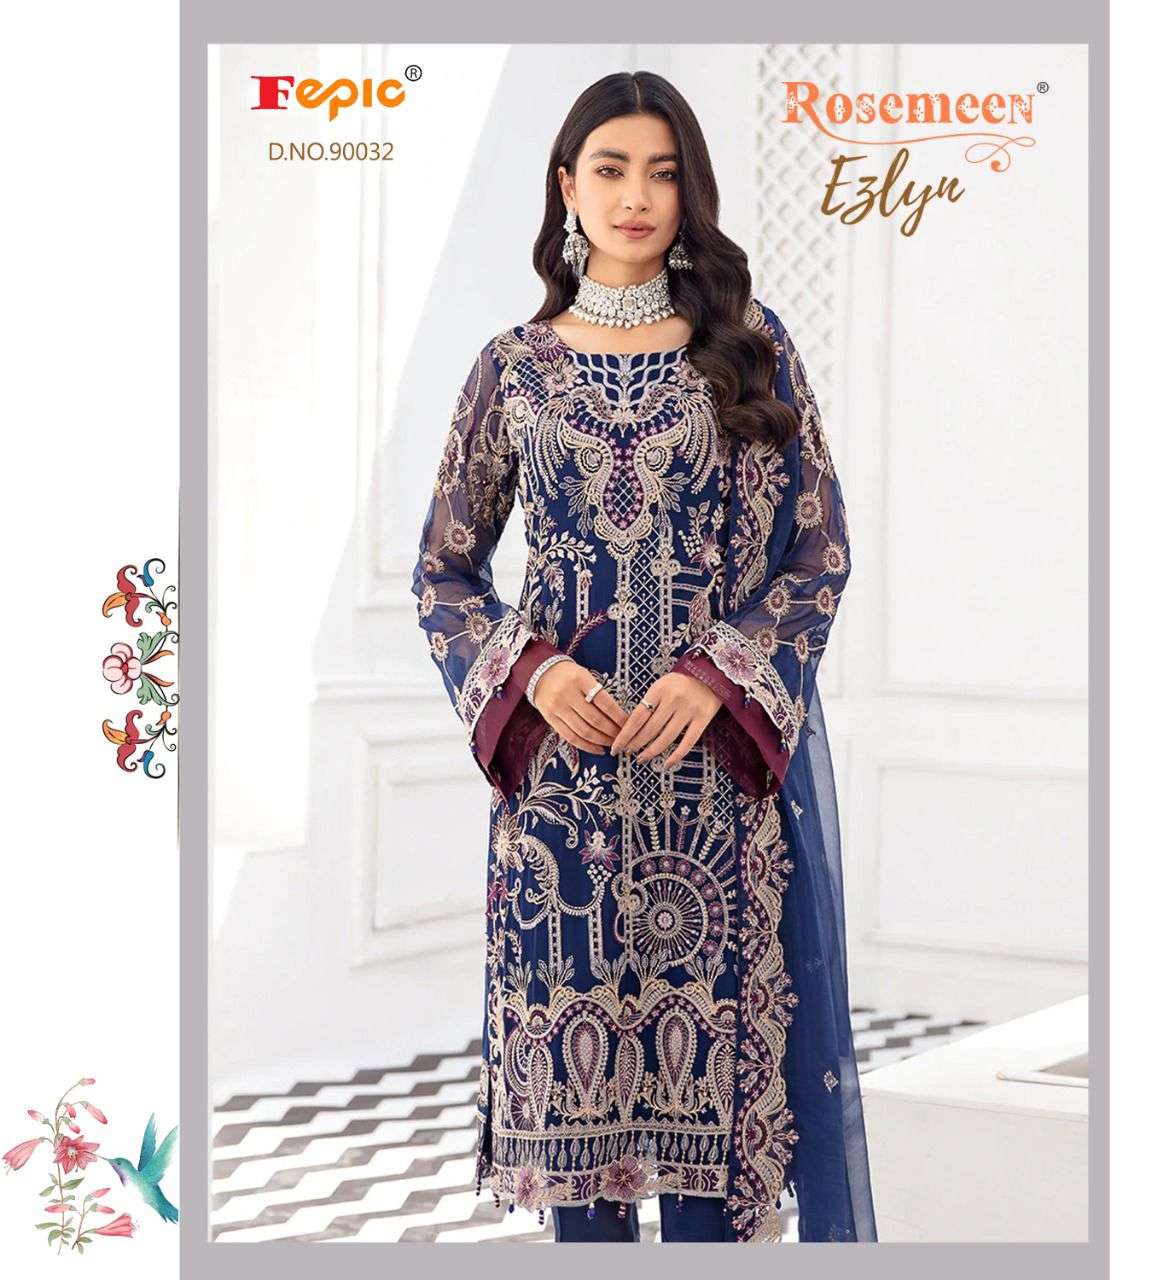 FEPIC ROSEMEEN EZLYN DESIGNER FAUX GEORGETTE EMBROIDERED PARTY WEAR SUITS IN WHOLESALE RATE